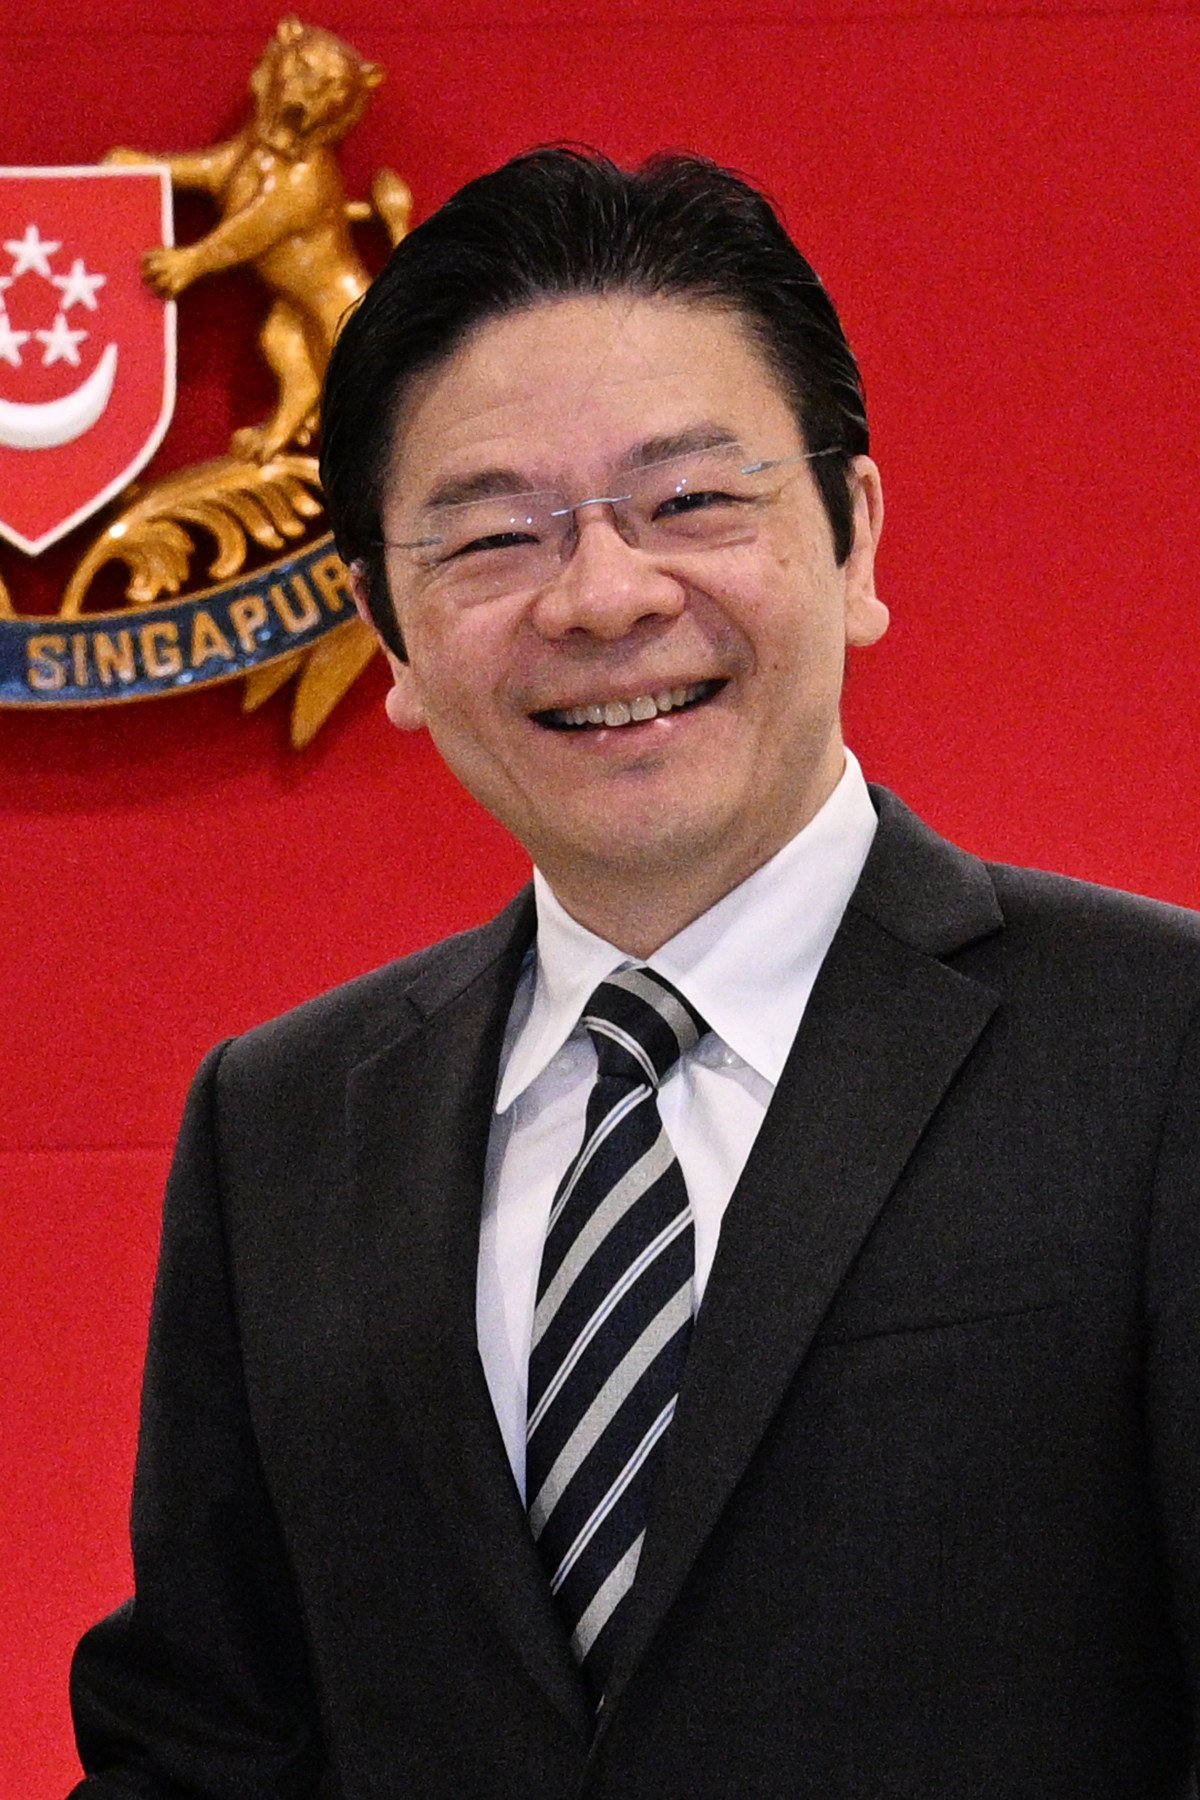 Lawrence Wong, Singapore’s current deputy prime minister and minister for finance, is set to succeed Lee Hsien Loong as the city state’s prime minister on May 15. Photo: Xinhua